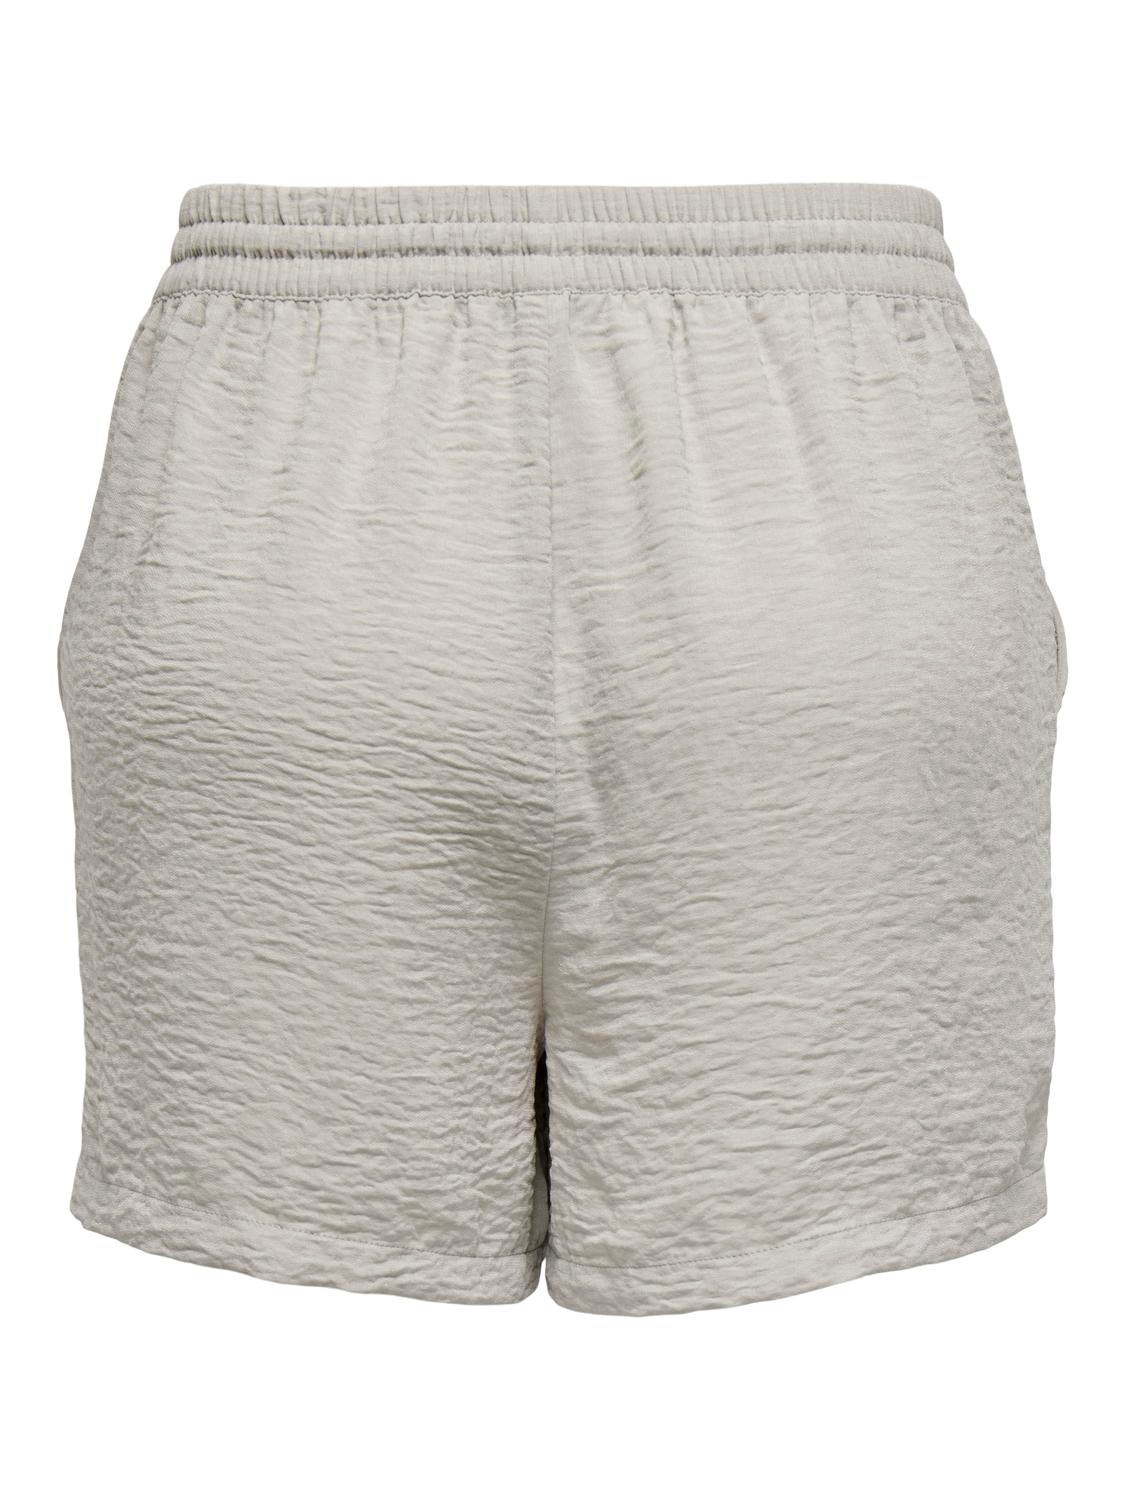 ONLY Shorts with mid waist -Chateau Gray - 15326999